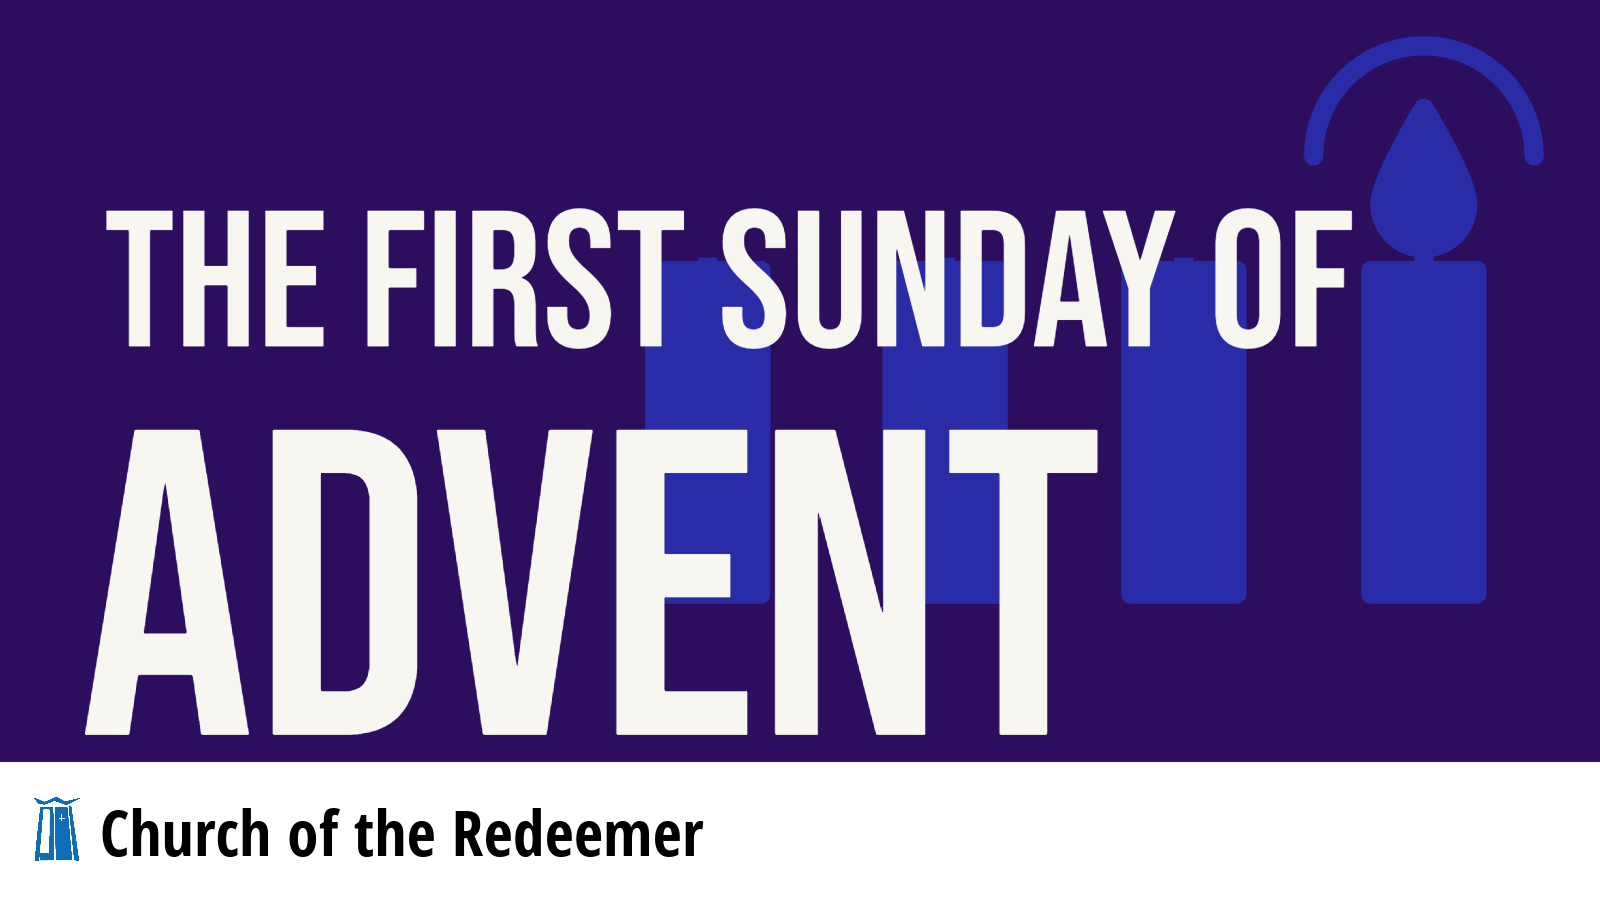 The 1st Sunday of Advent